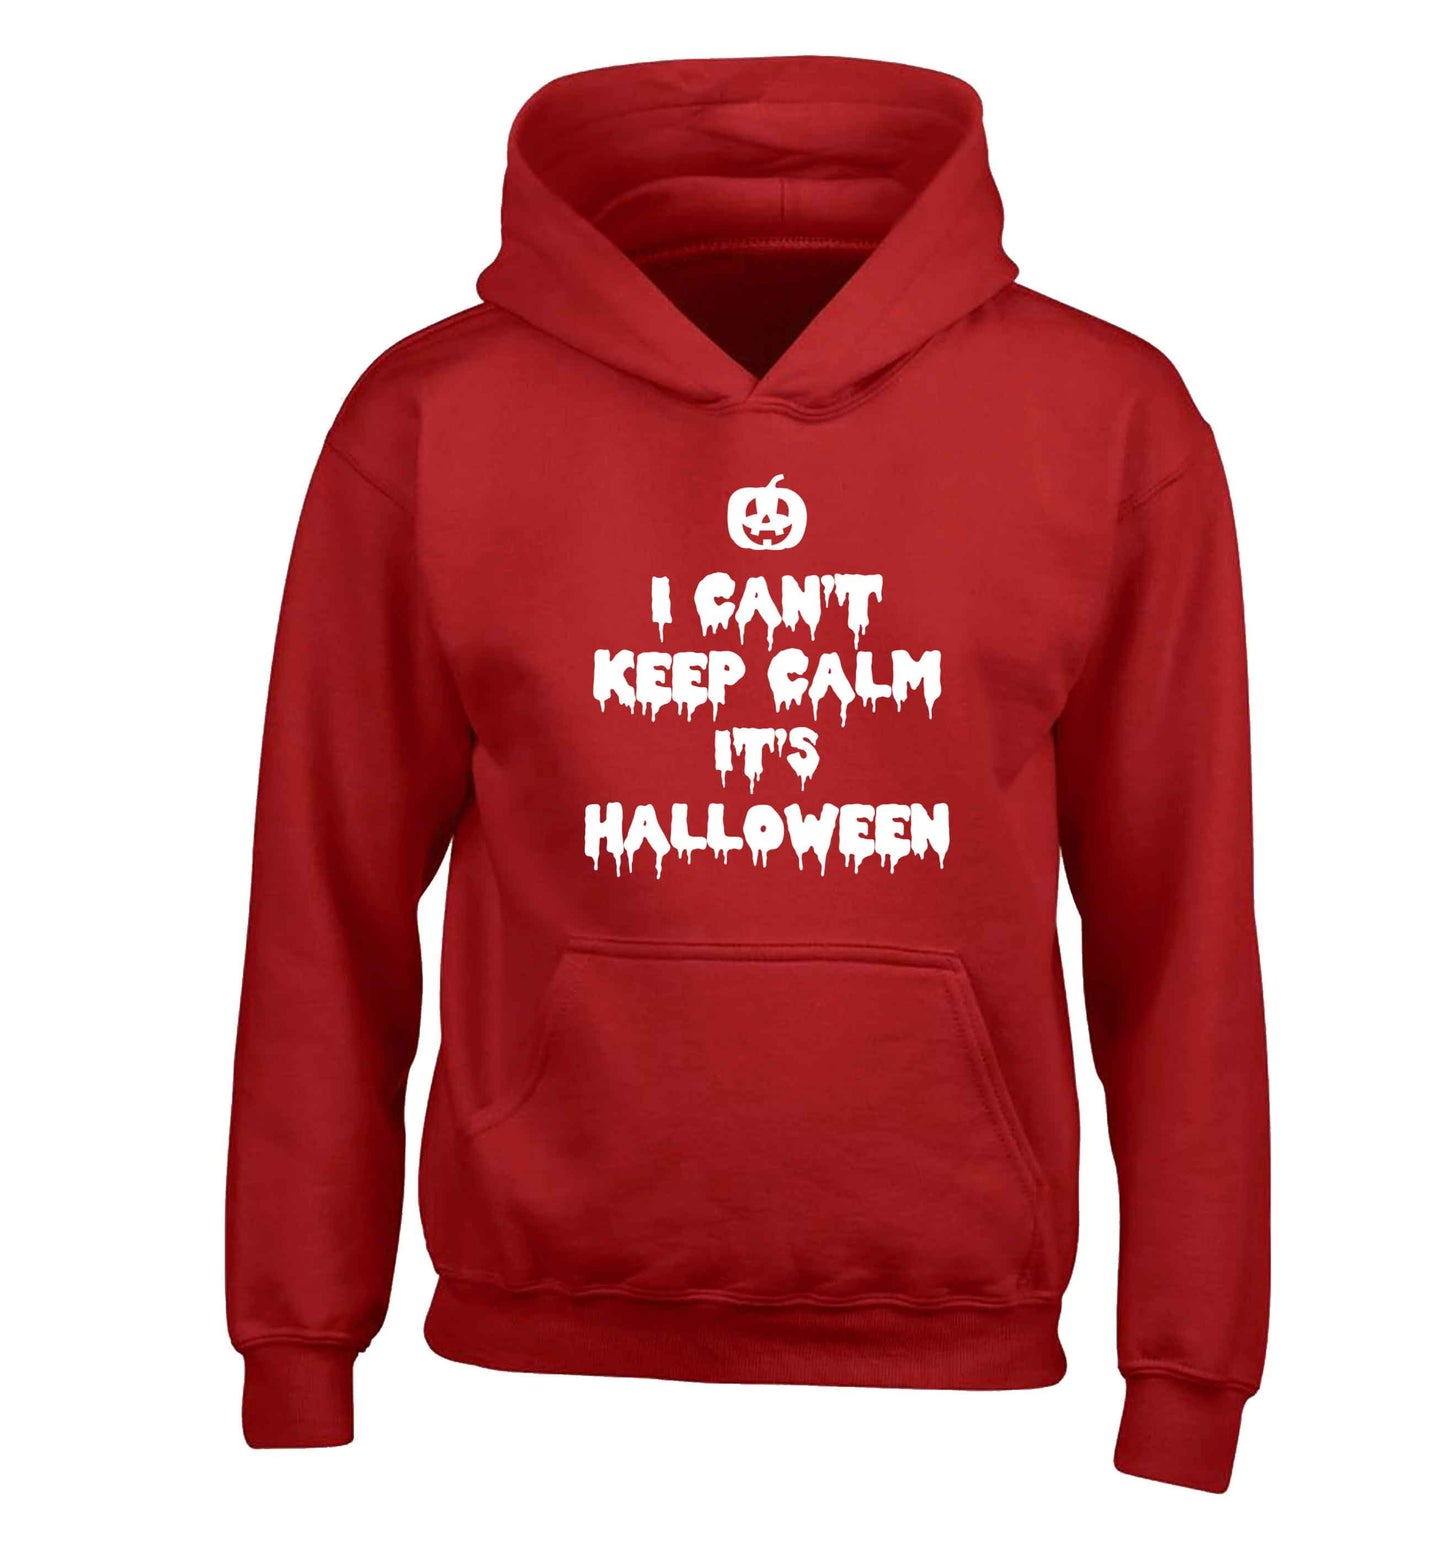 I can't keep calm it's halloween children's red hoodie 12-13 Years